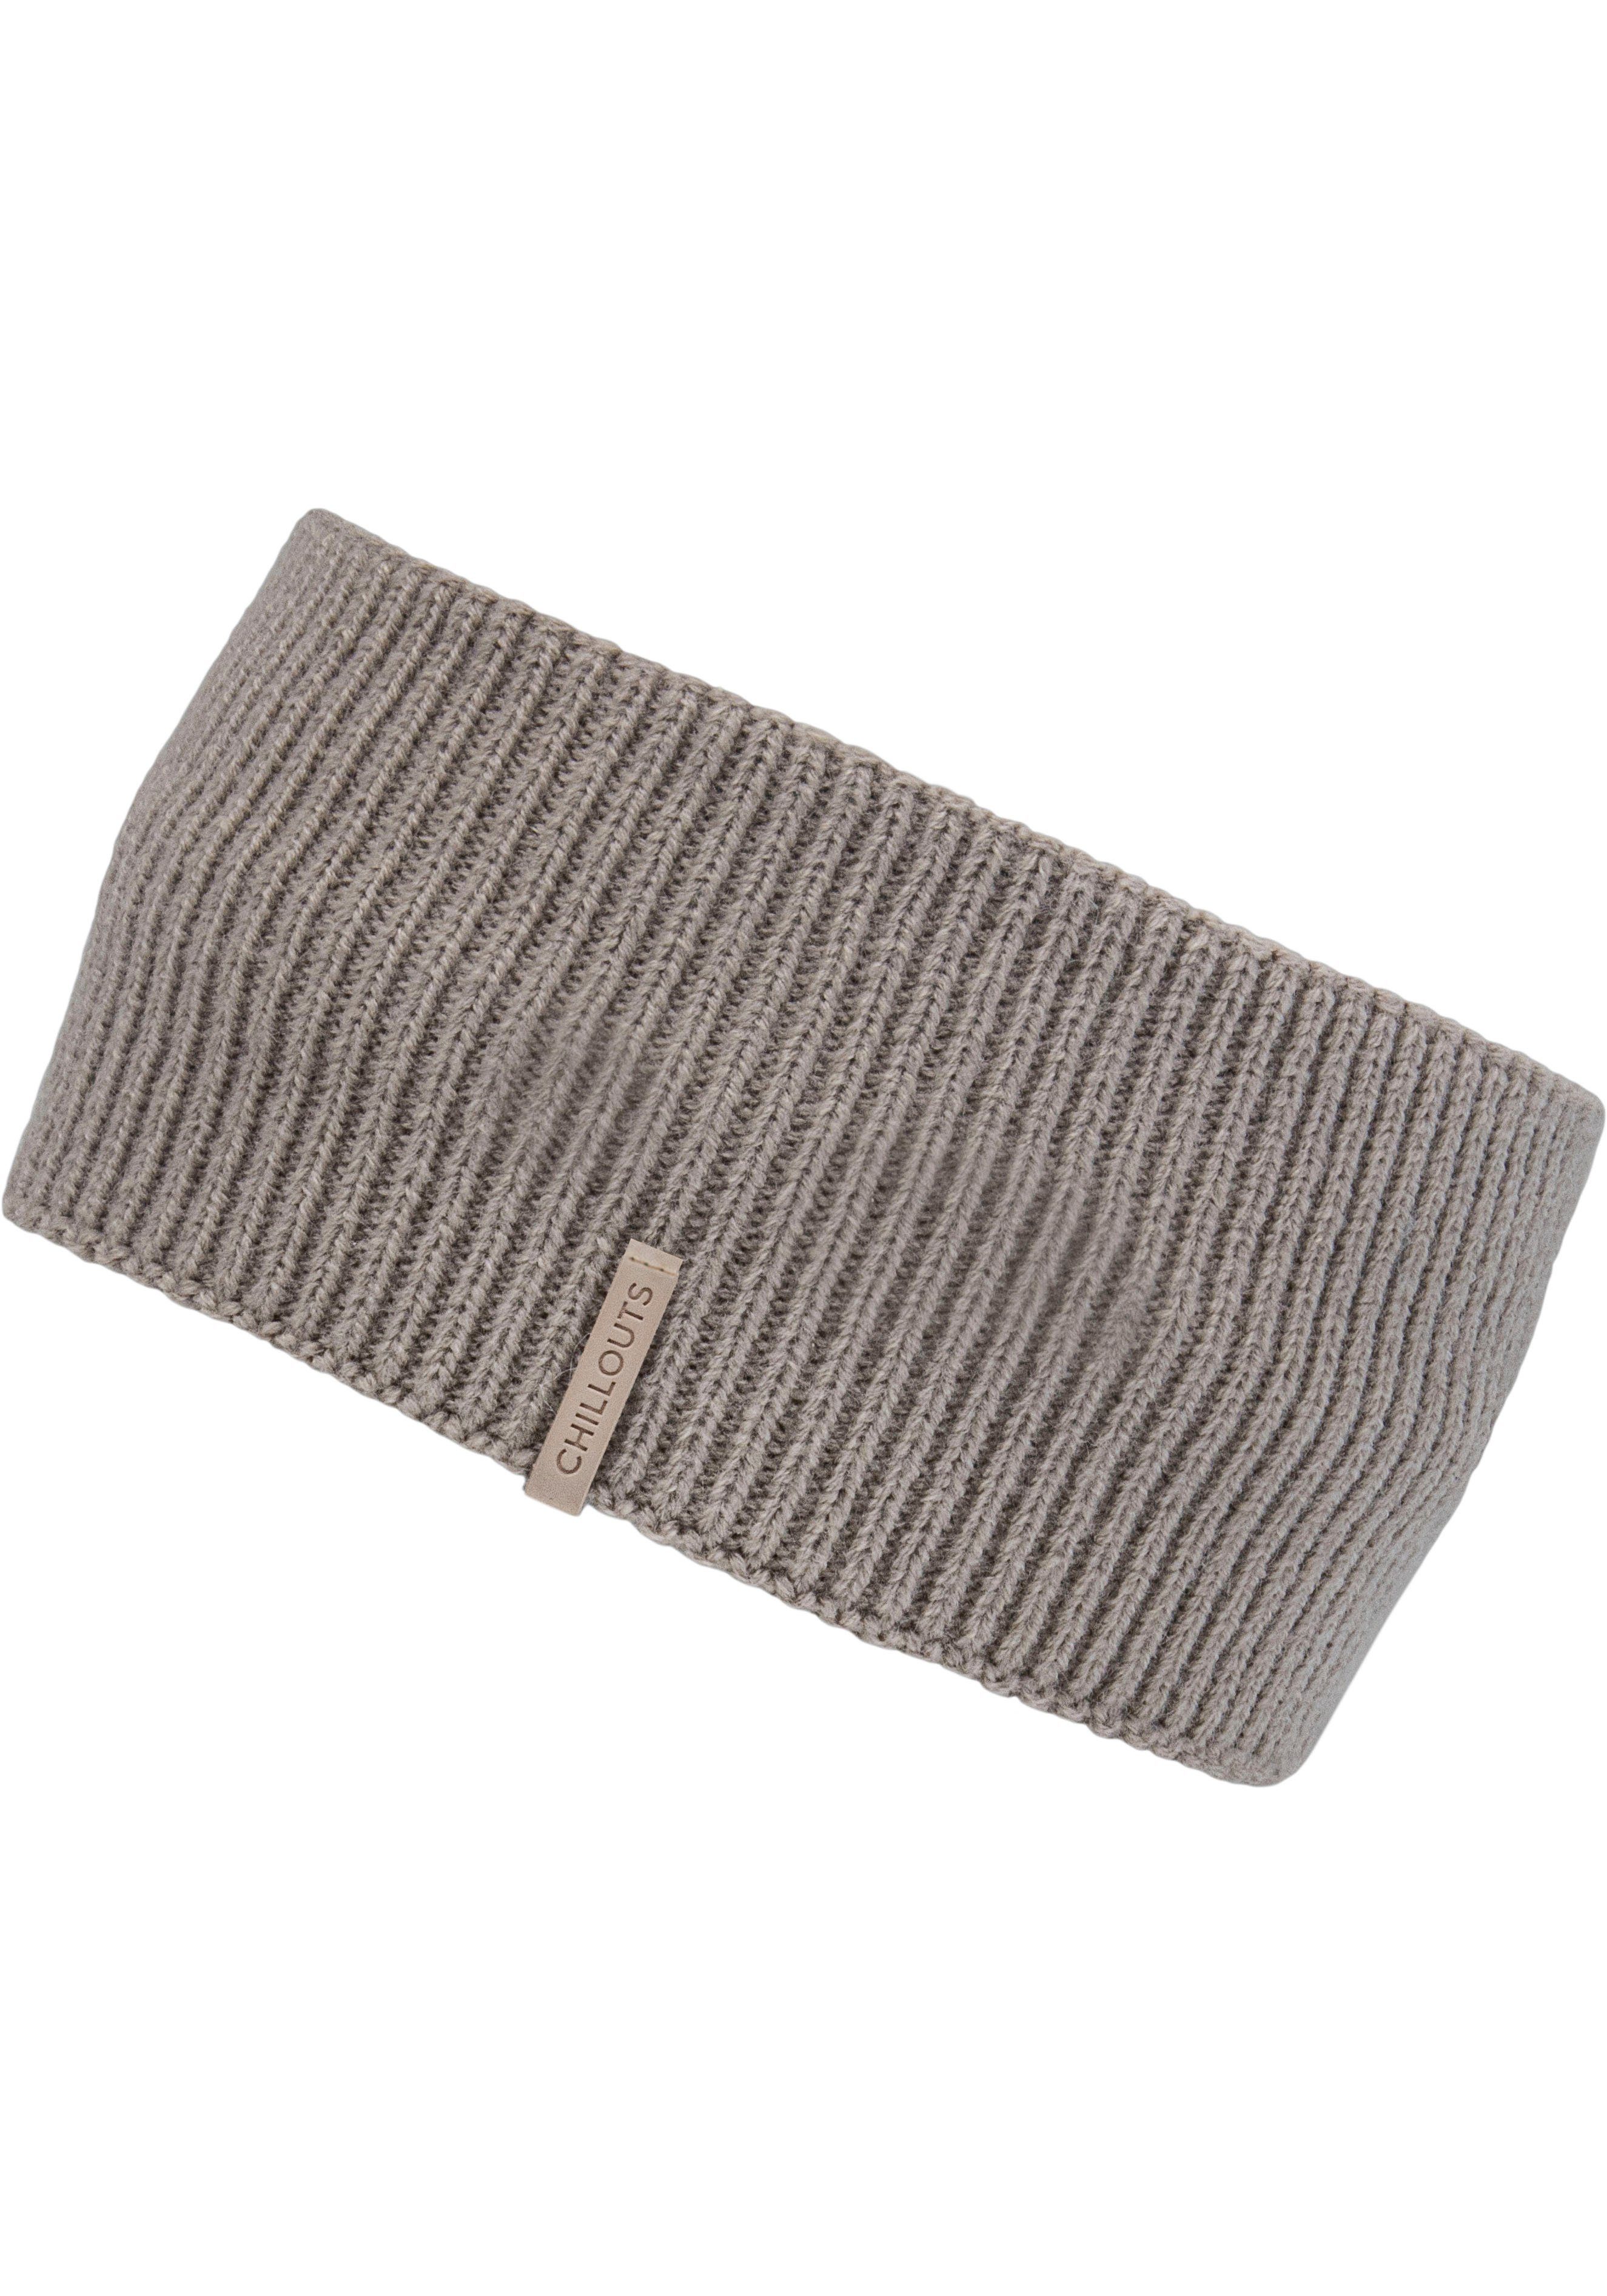 chillouts Stirnband Ida Headband Trendiges Accessoire taupe